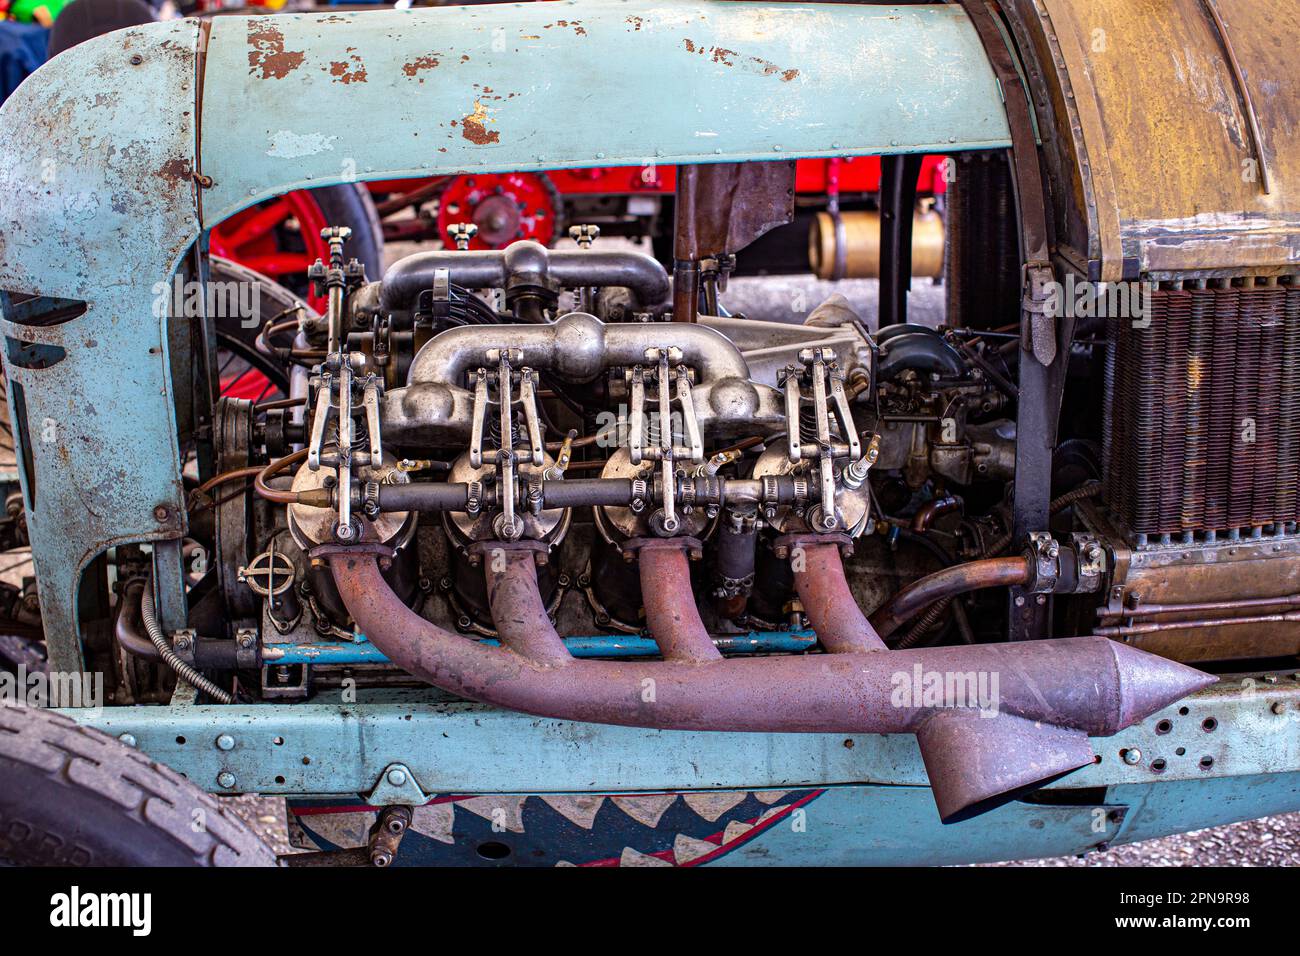 Close up of Pre War car engine at Members' Meeting at Goodwood Motor Circuit in West Sussex,United Kingdom. Stock Photo